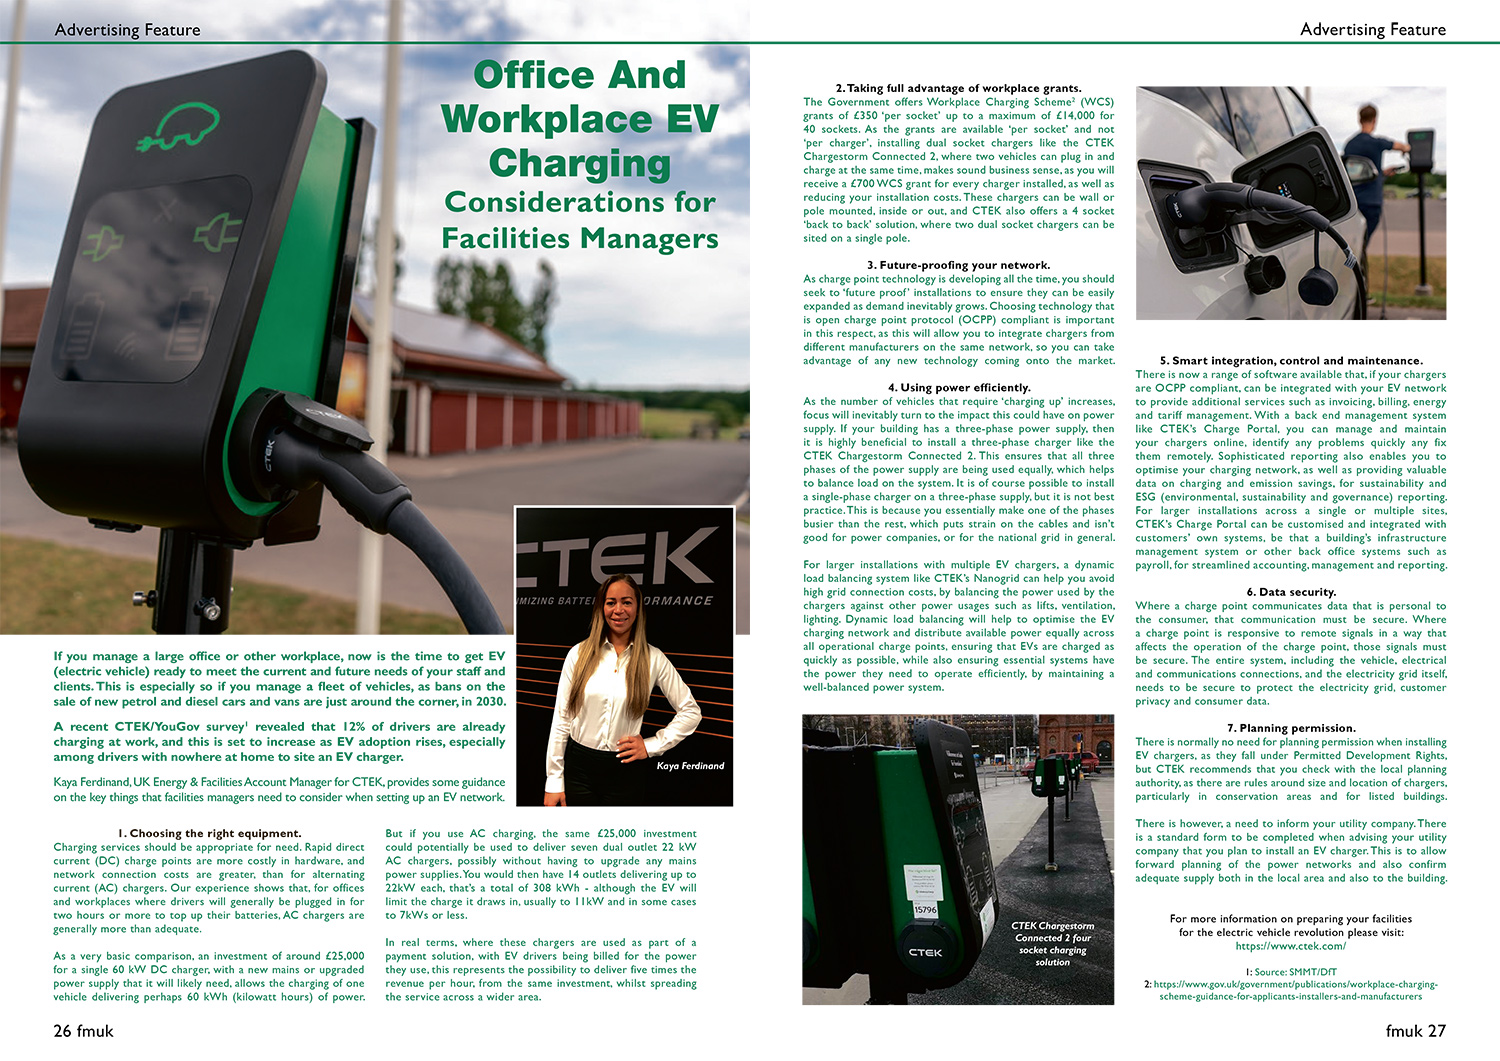 Office And Workplace EV Charging